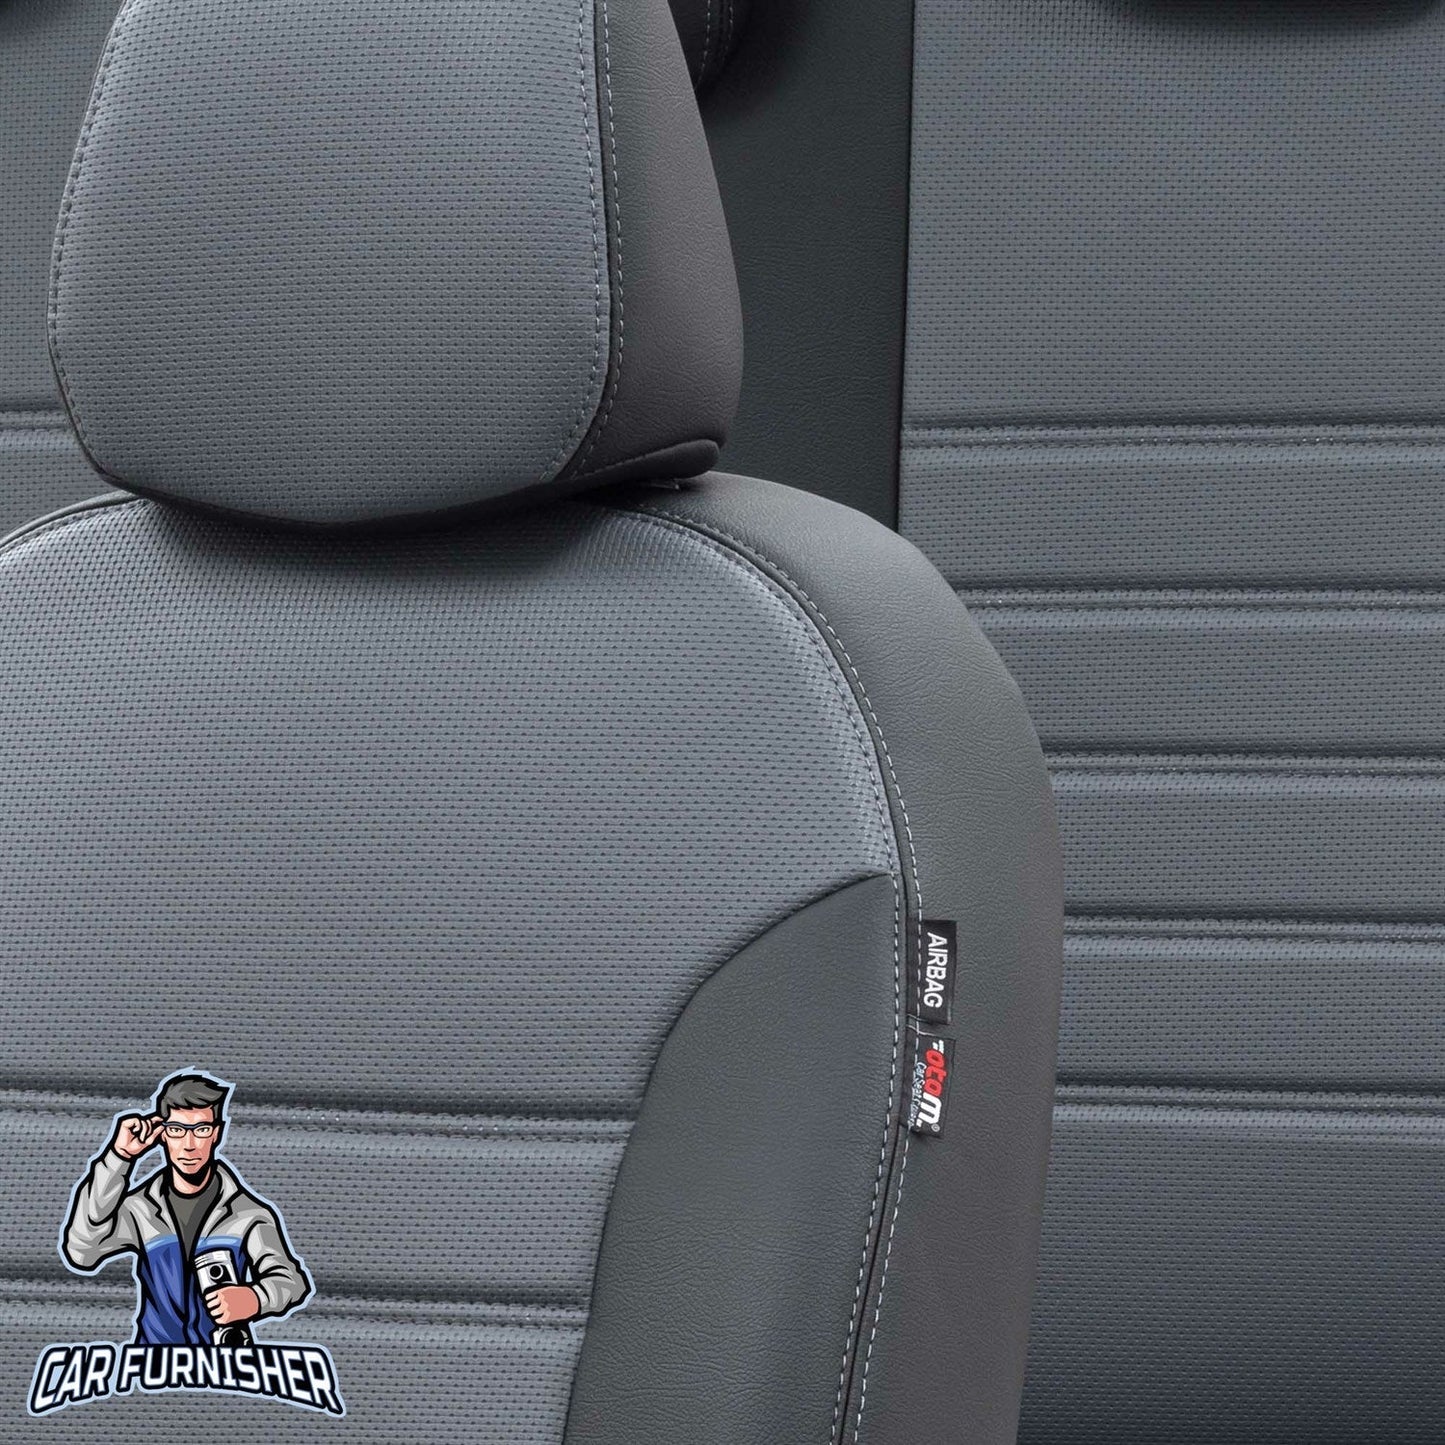 Renault Master Seat Covers New York Leather Design Smoked Black Leather